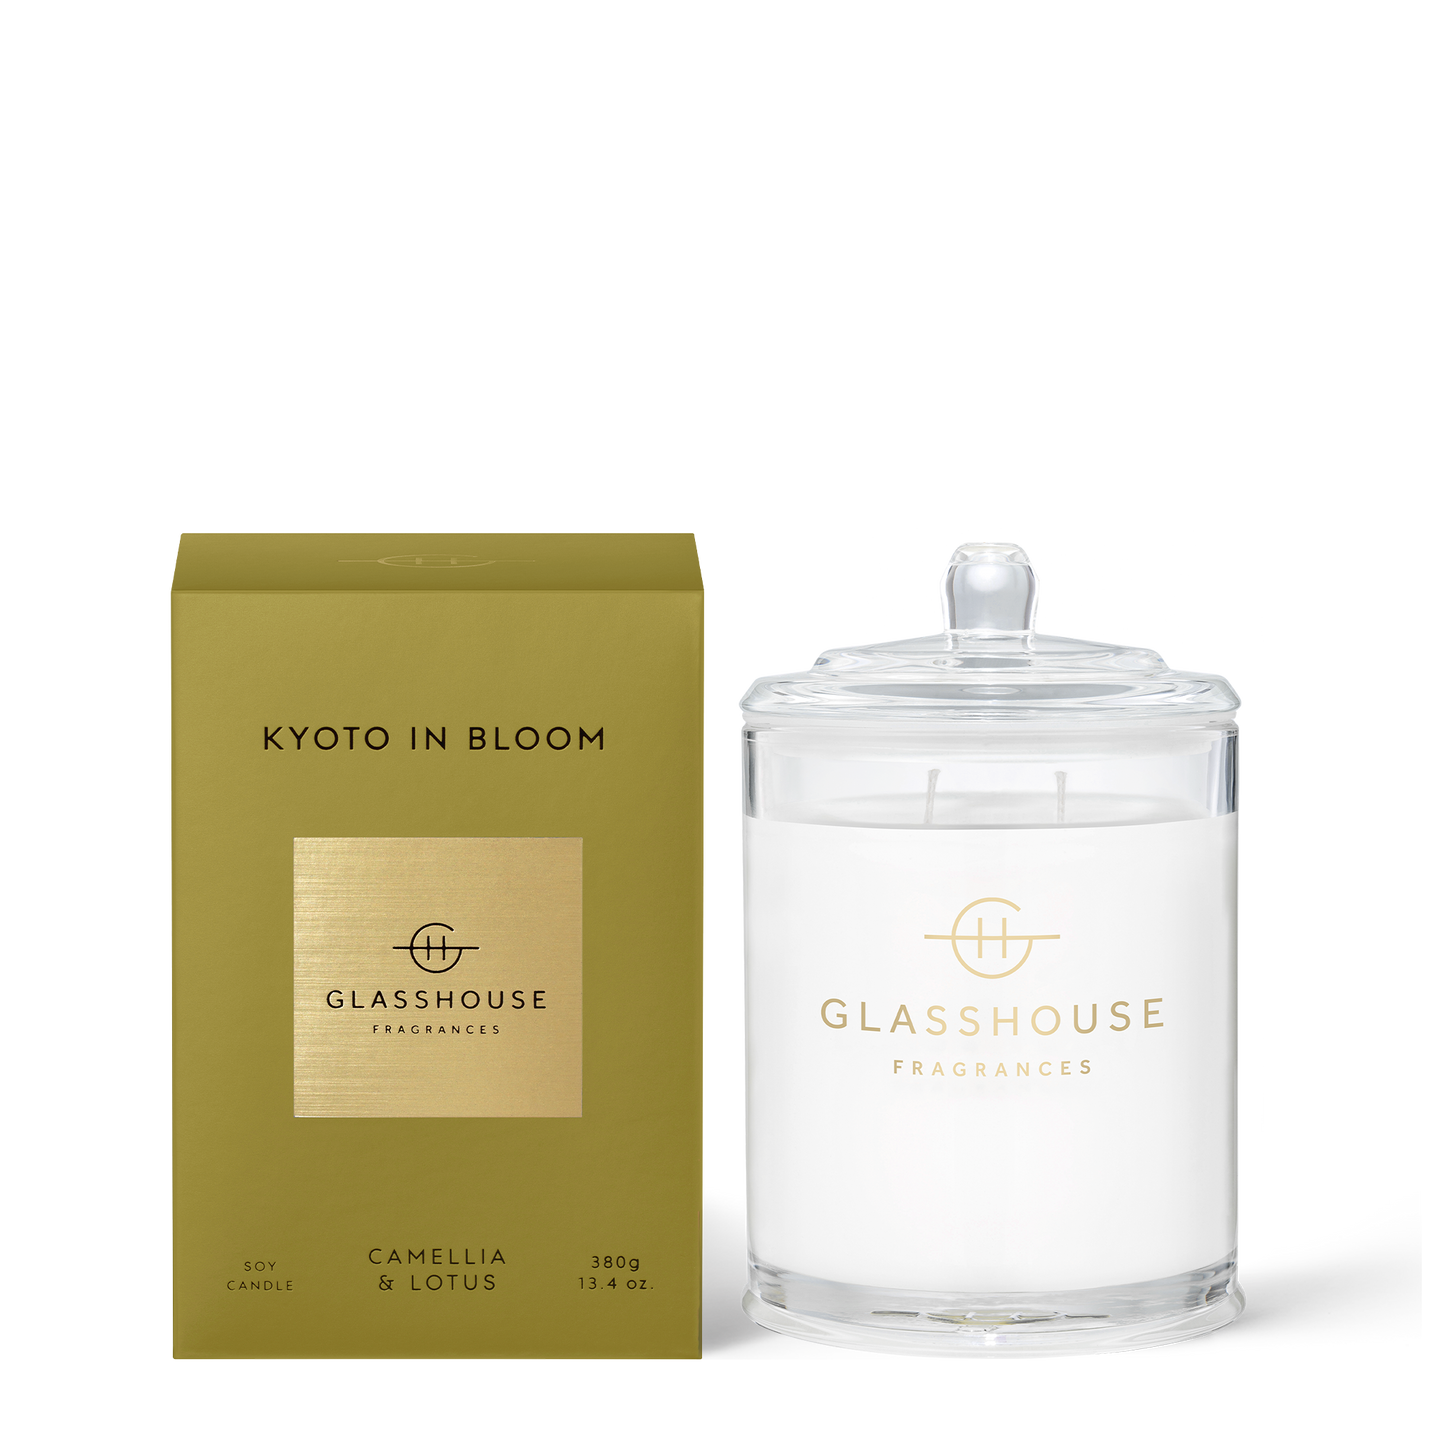 Glasshouse “Kyoto In Bloom” Soy Candle